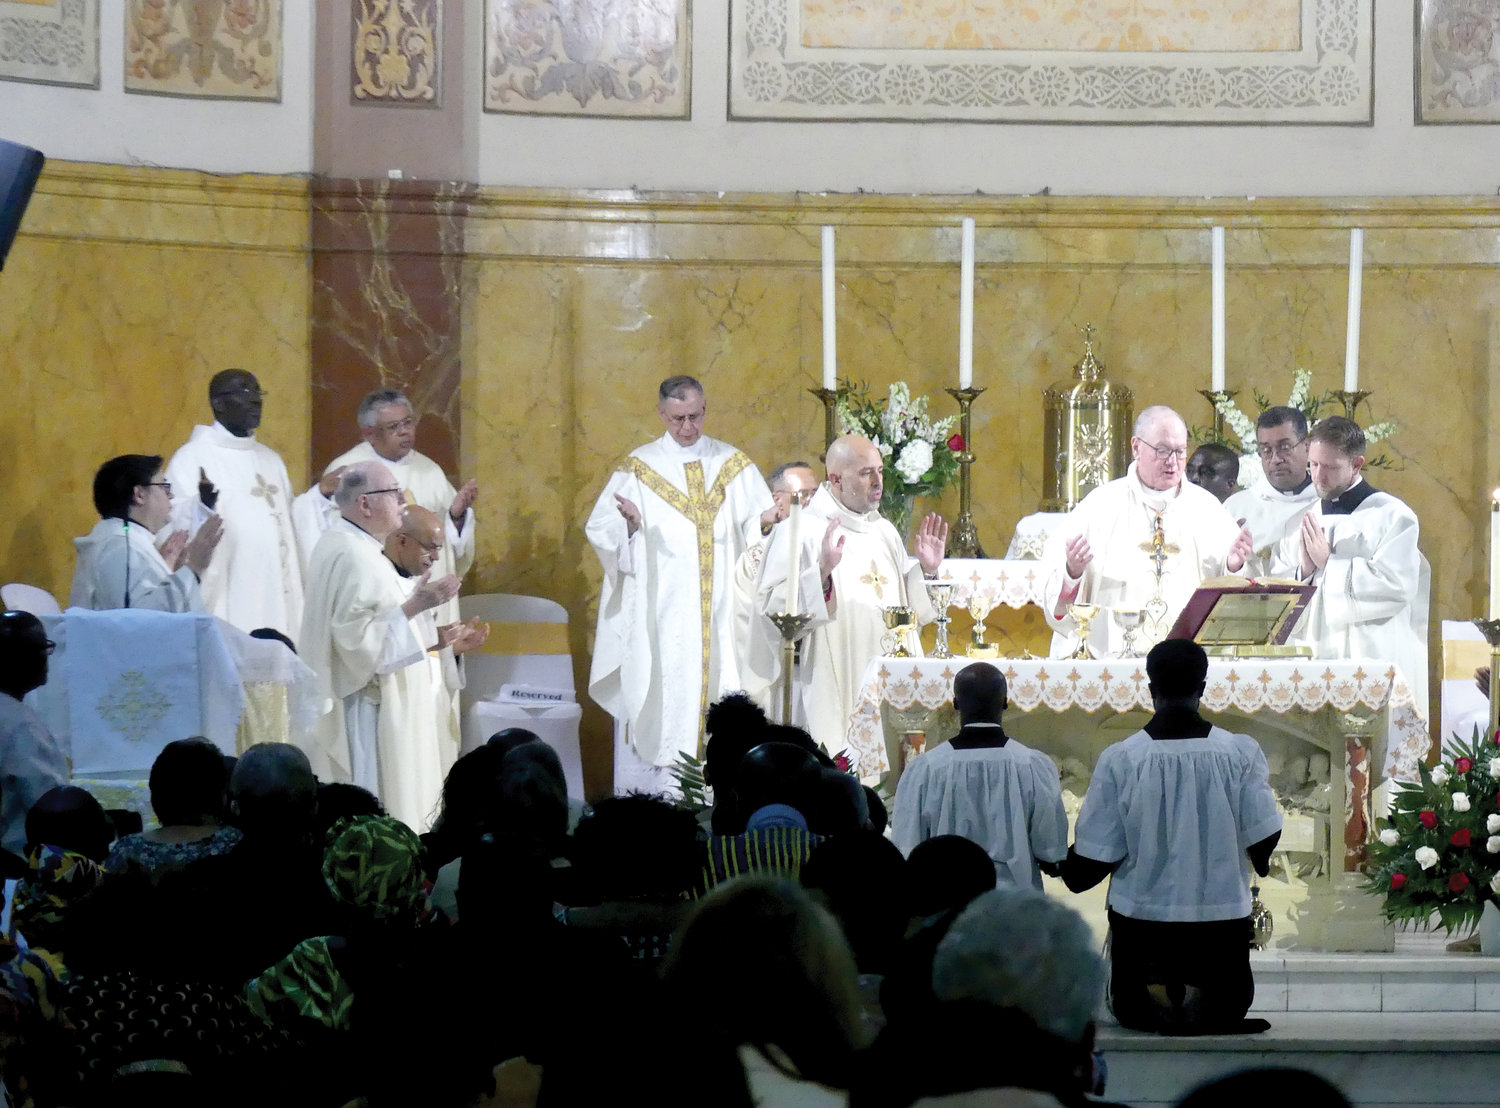 Cardinal Dolan consecrates the Eucharist at the Oct. 22 Mass commemorating the 125th anniversary of St. Luke’s parish in the Bronx. The cardinal, principal celebrant, noted the rich immigrant history of the parish community. To the left of the cardinal is Auxiliary Bishop Joseph Espaillat, and to his right is Father Eric Cruz, administrator of St. Luke’s.